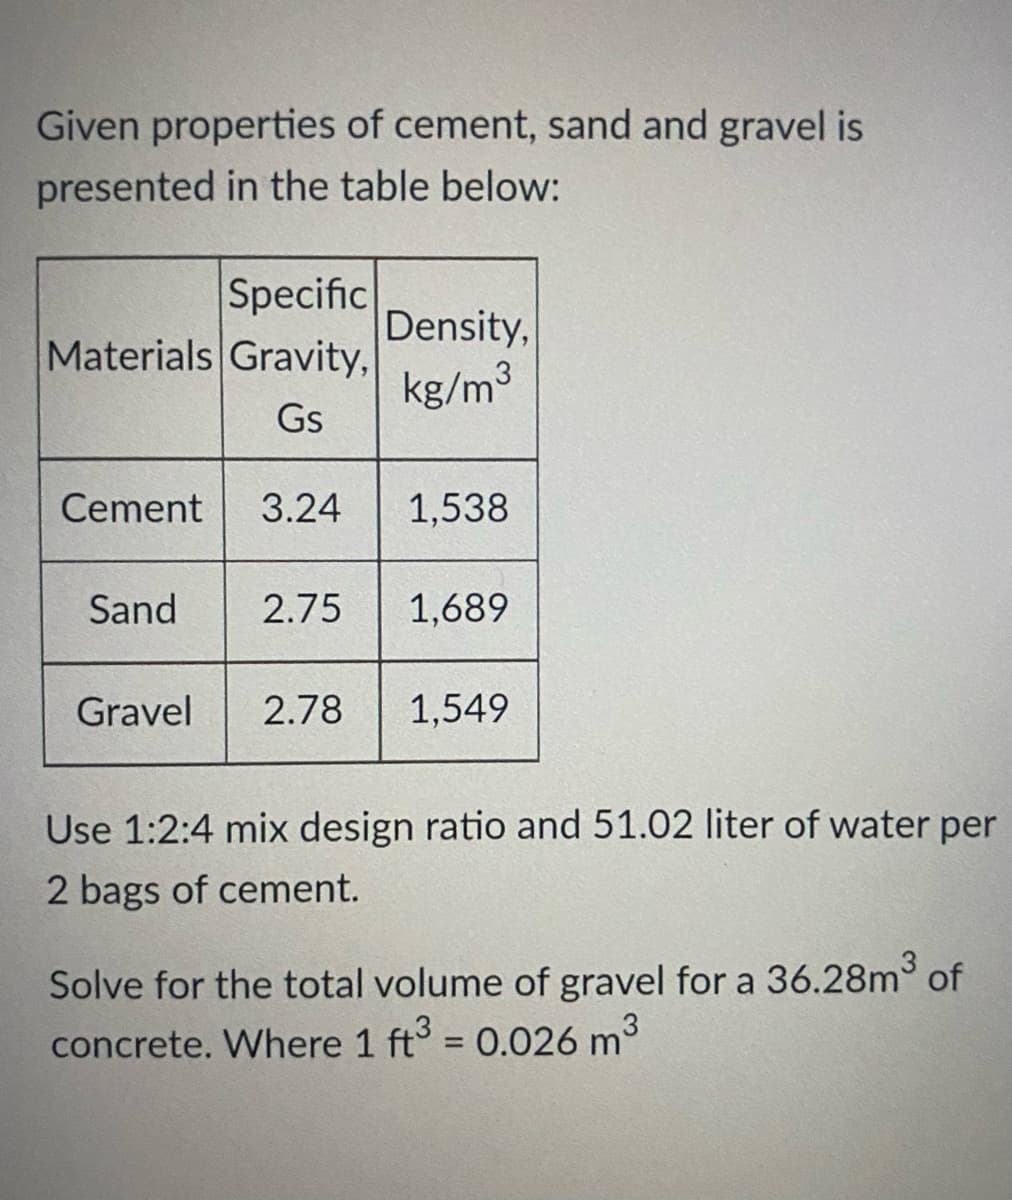 Given properties of cement, sand and gravel is
presented in the table below:
Specific
Materials Gravity,
kg/m
Density,
Gs
Cement
3.24
1,538
Sand
2.75
1,689
Gravel
2.78
1,549
Use 1:2:4 mix design ratio and 51.02 liter of water per
2 bags of cement.
Solve for the total volume of gravel for a 36.28m of
concrete. Where 1 ft = 0.026 m3
%3D
